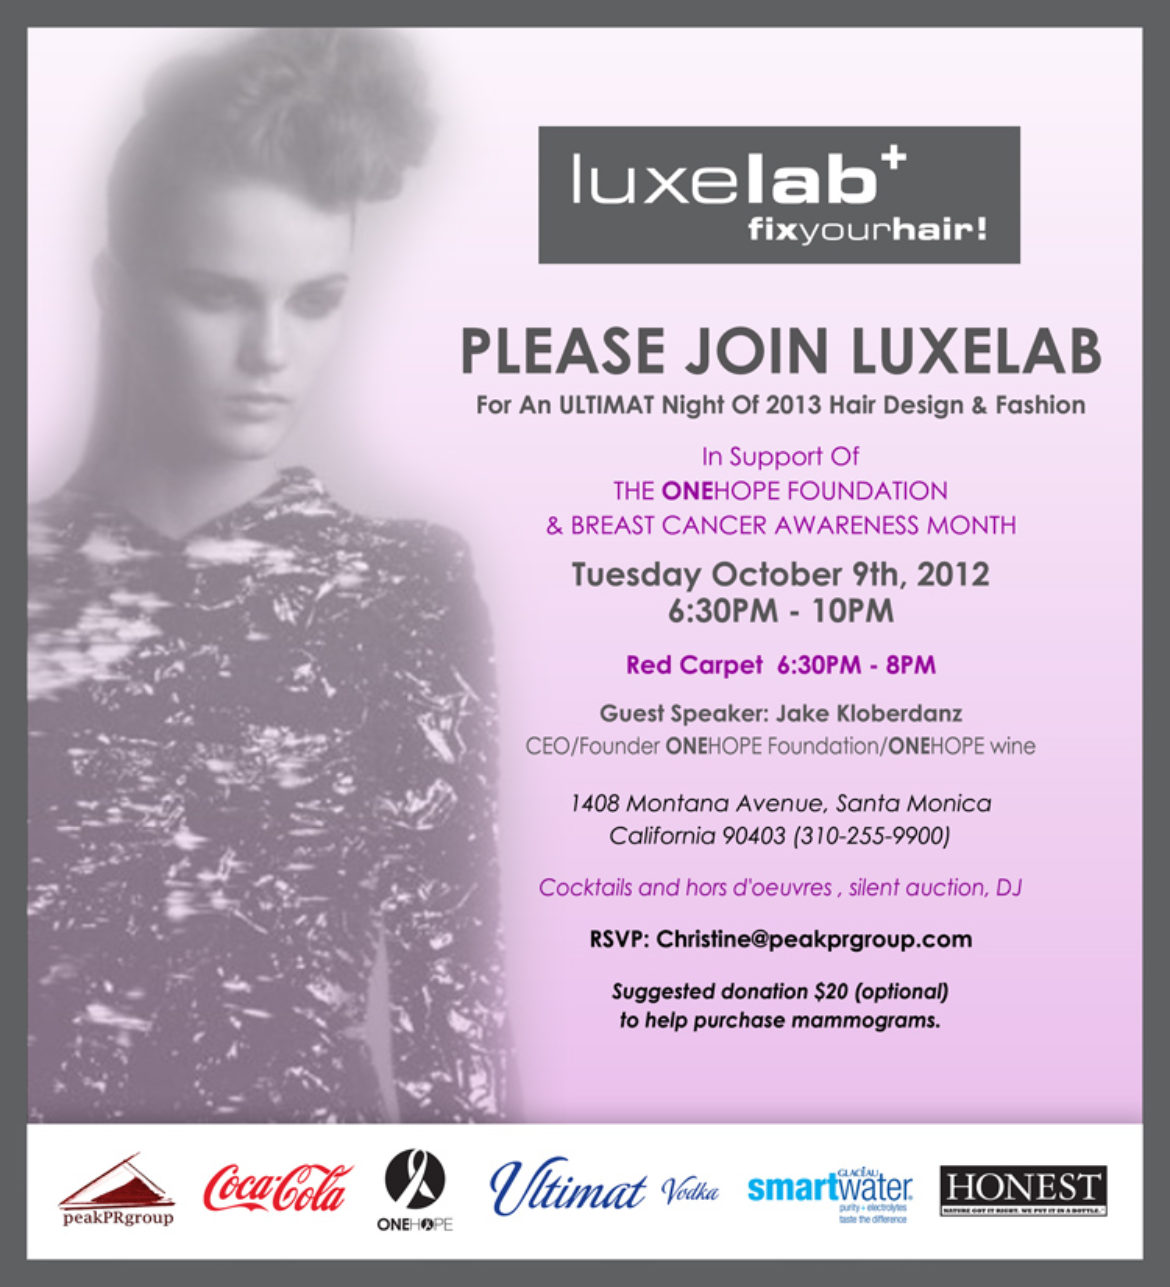 Come Help Luxelab Fight Breast Cancer With Style